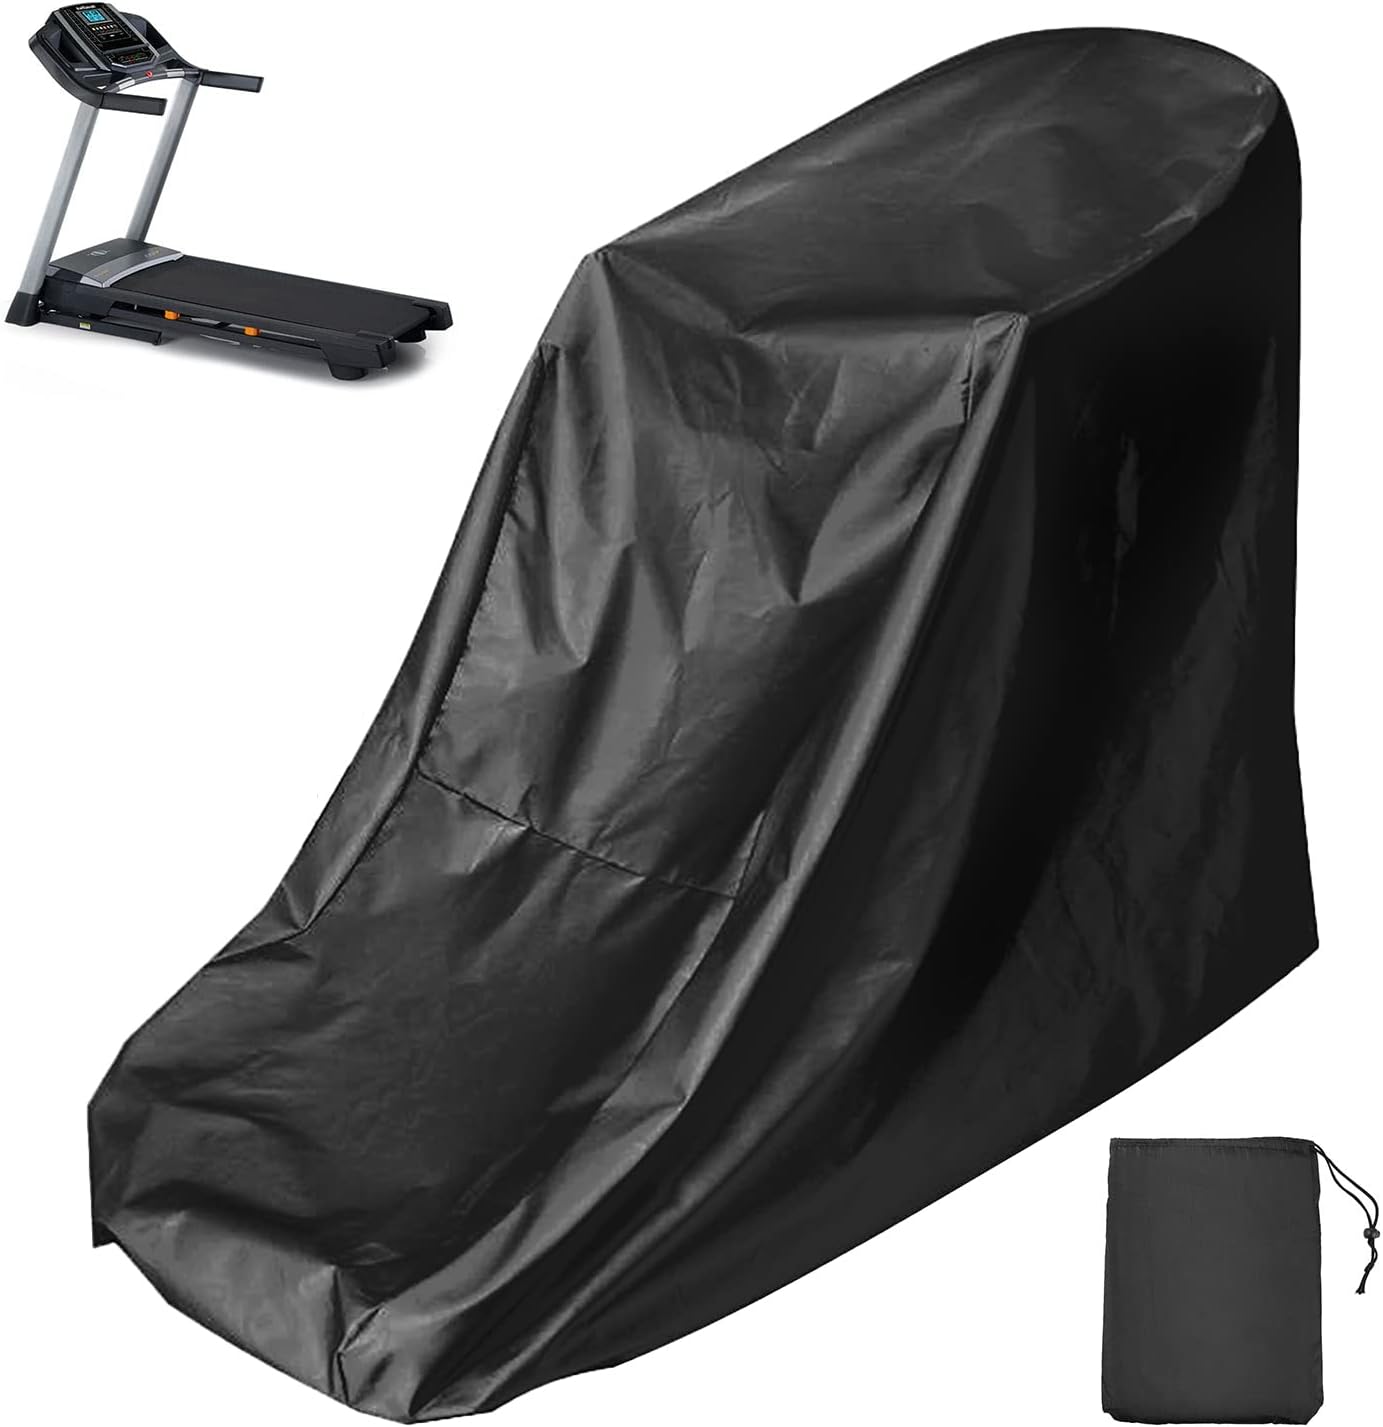 Bavnnro Treadmill Cover, Dustproof Waterproof Cover Fit for Home Non-Folding Running Machine Protective Cover with Drawstring for Indoor  Outdoor (Black,78 x 37 x 59 inch)